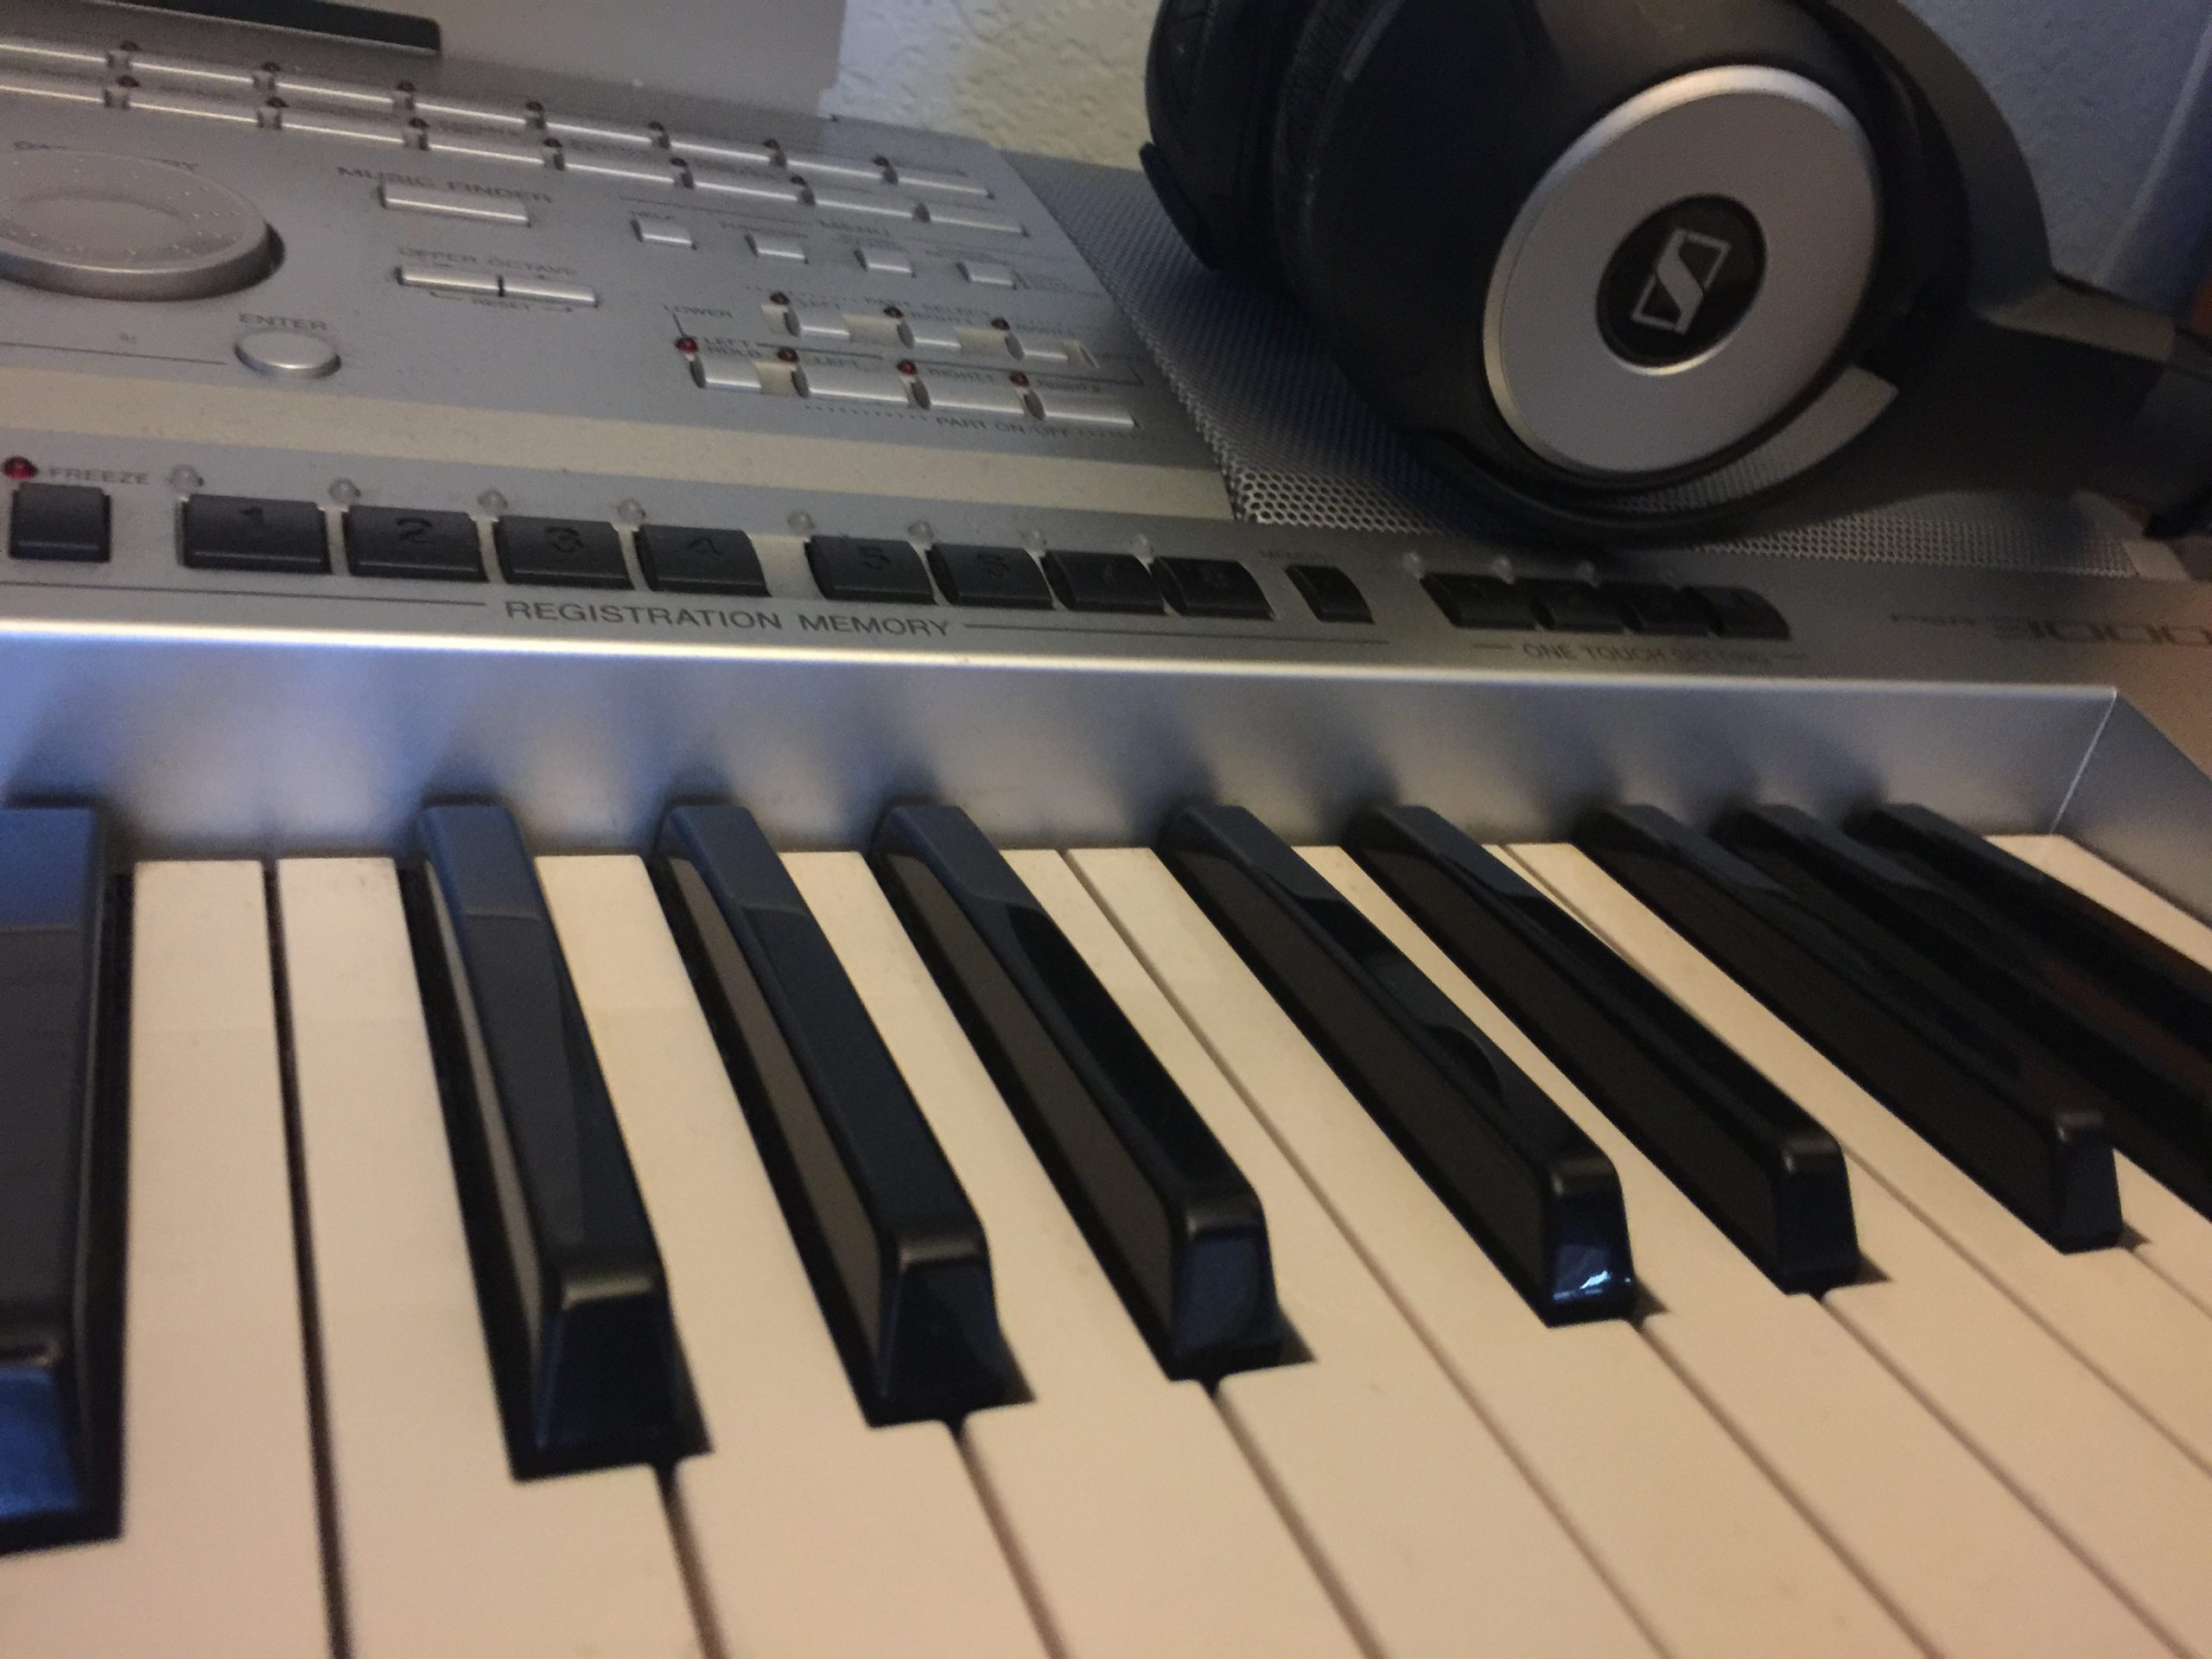 A piano keyboard and headphones